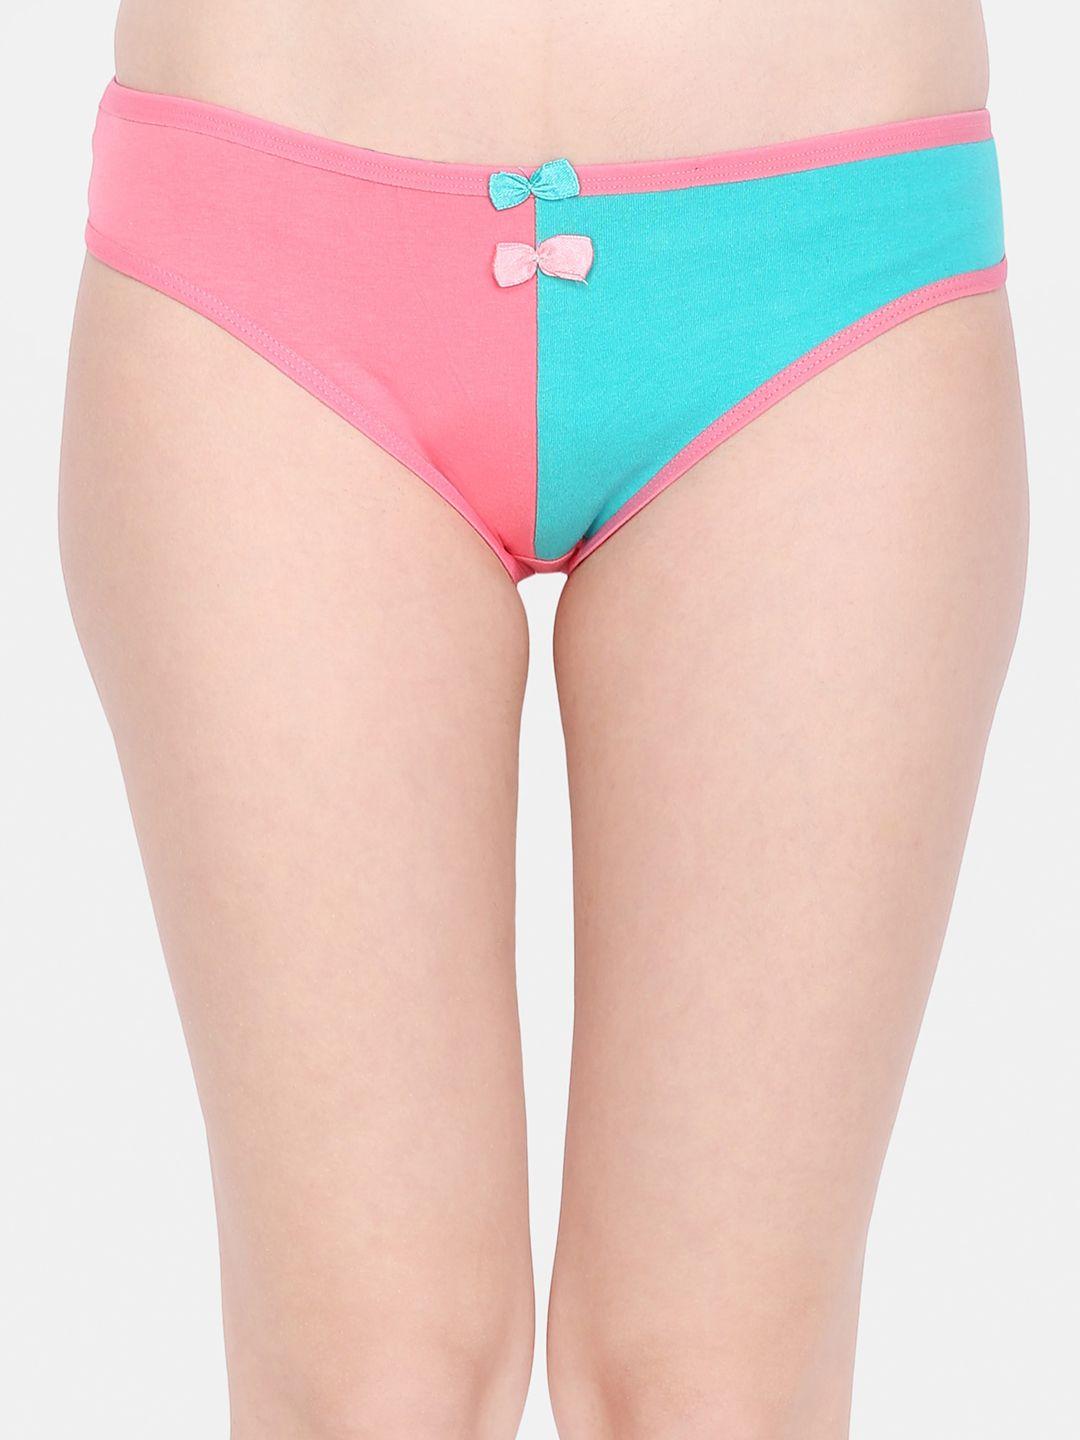 ms.lingies women pink & turquoise blue colourblocked thong briefs z08-87316s